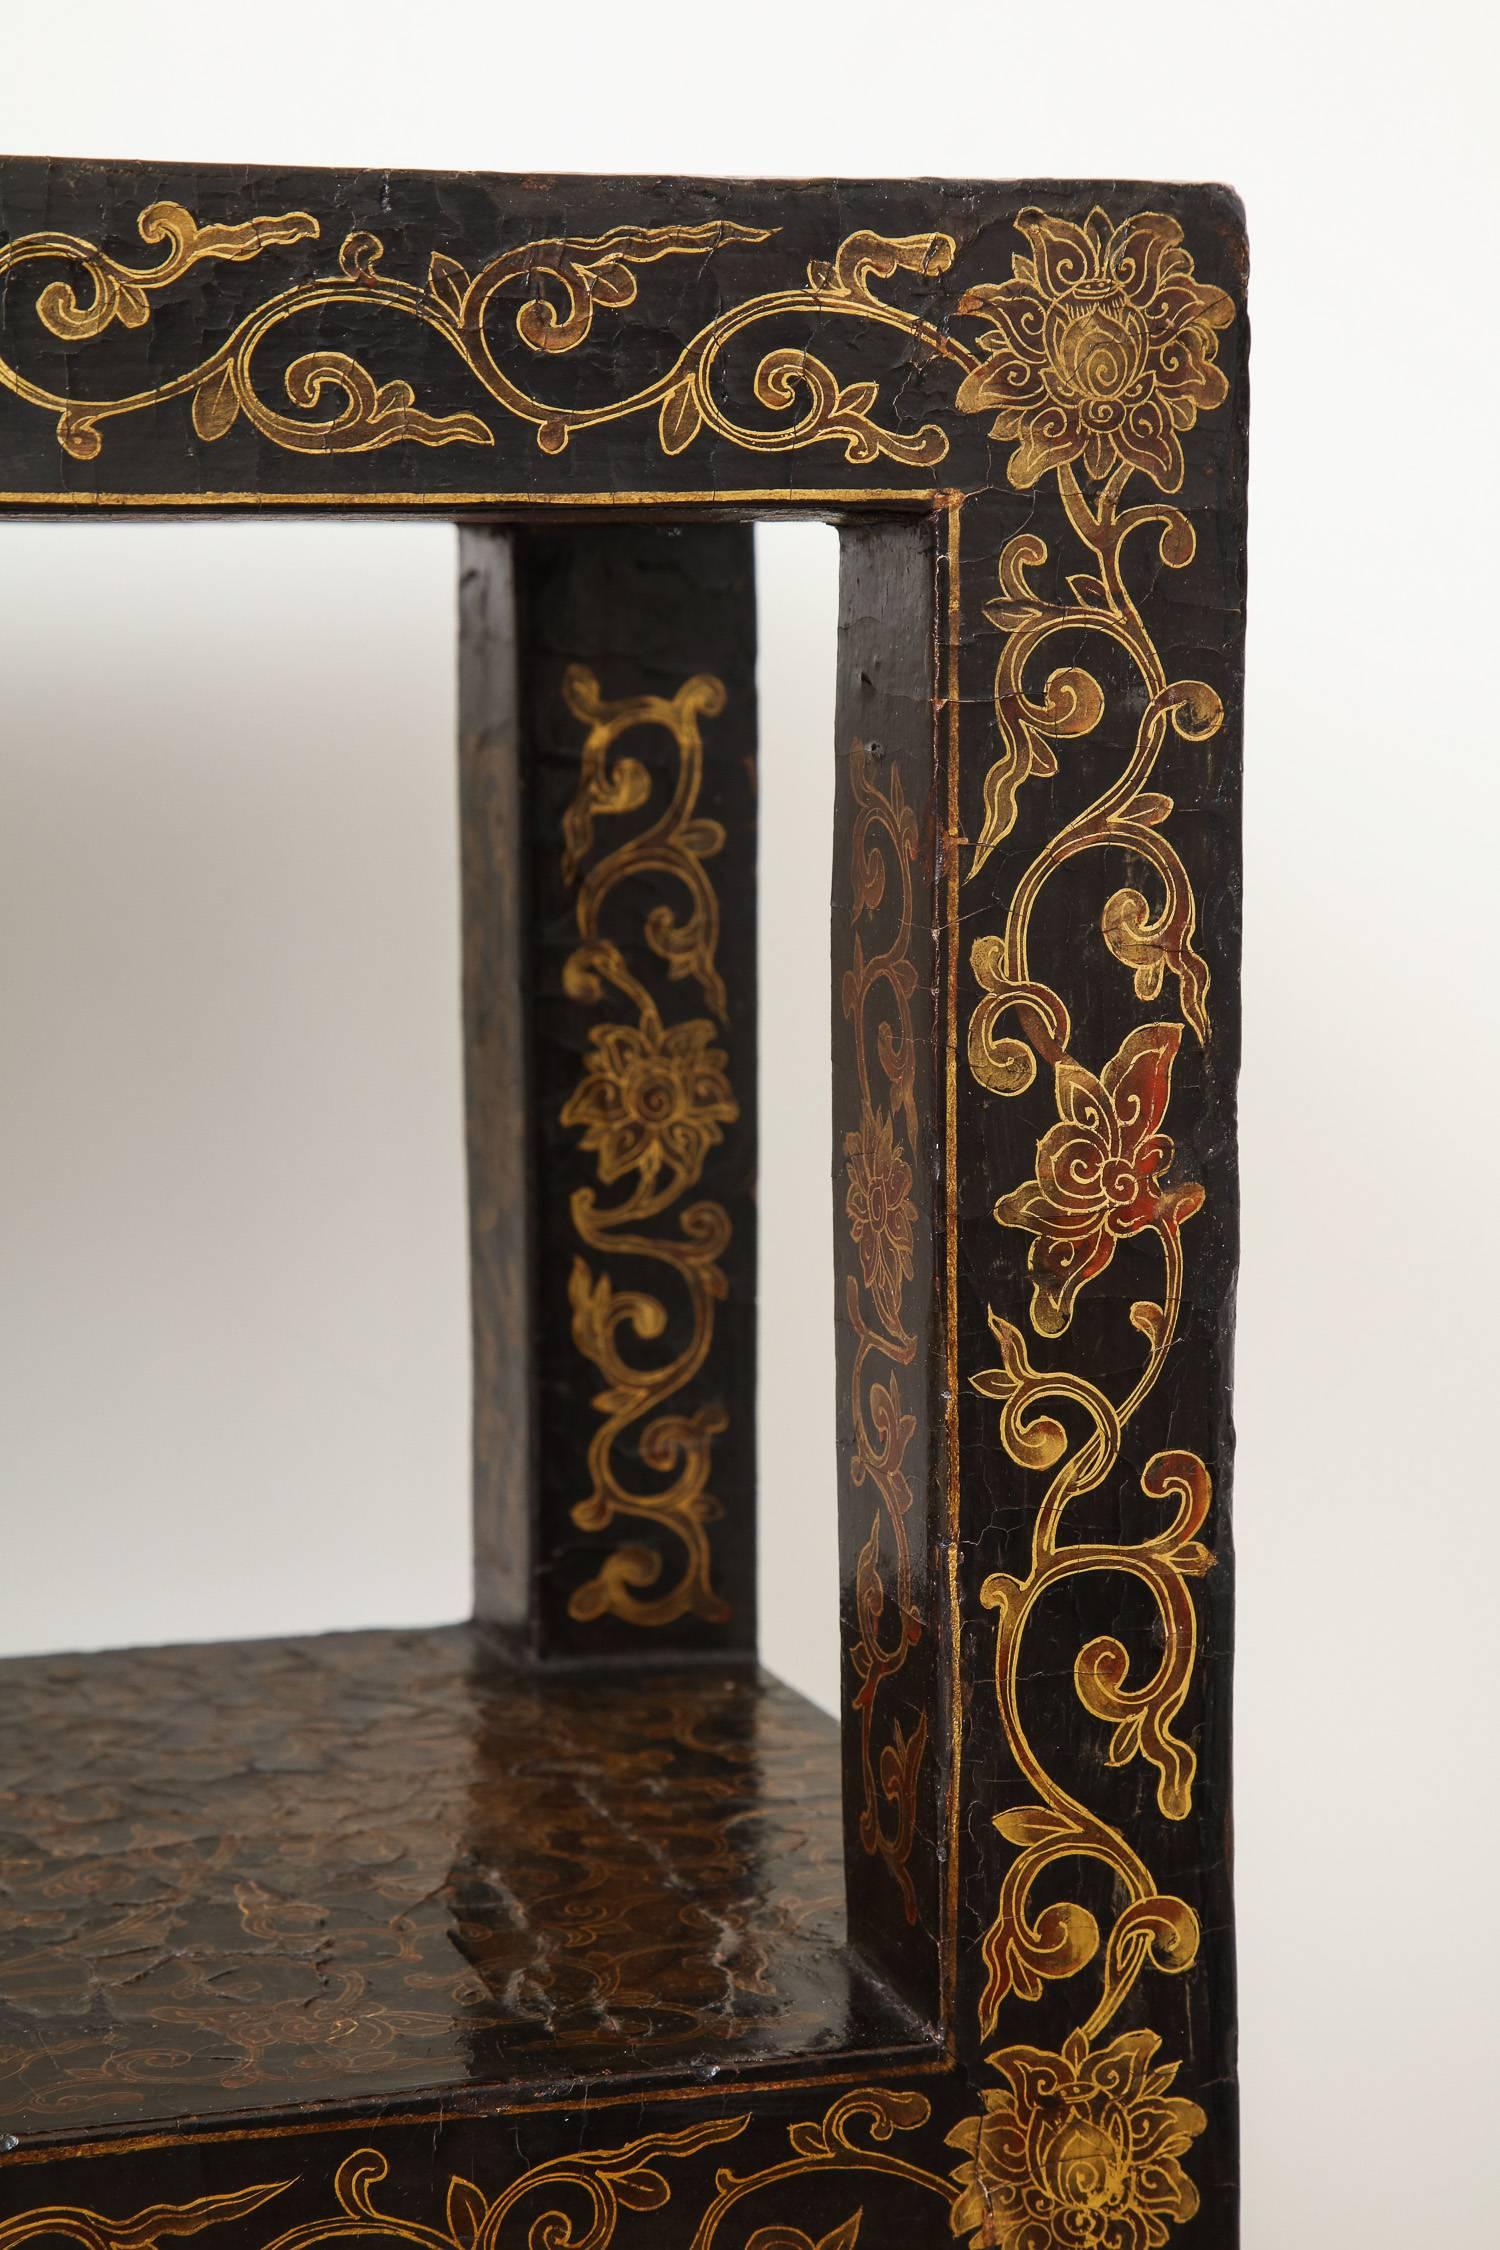 Rare 18th Century Chinese Gilt-Decorated Lacquer Bookshelf In Excellent Condition In New York, NY